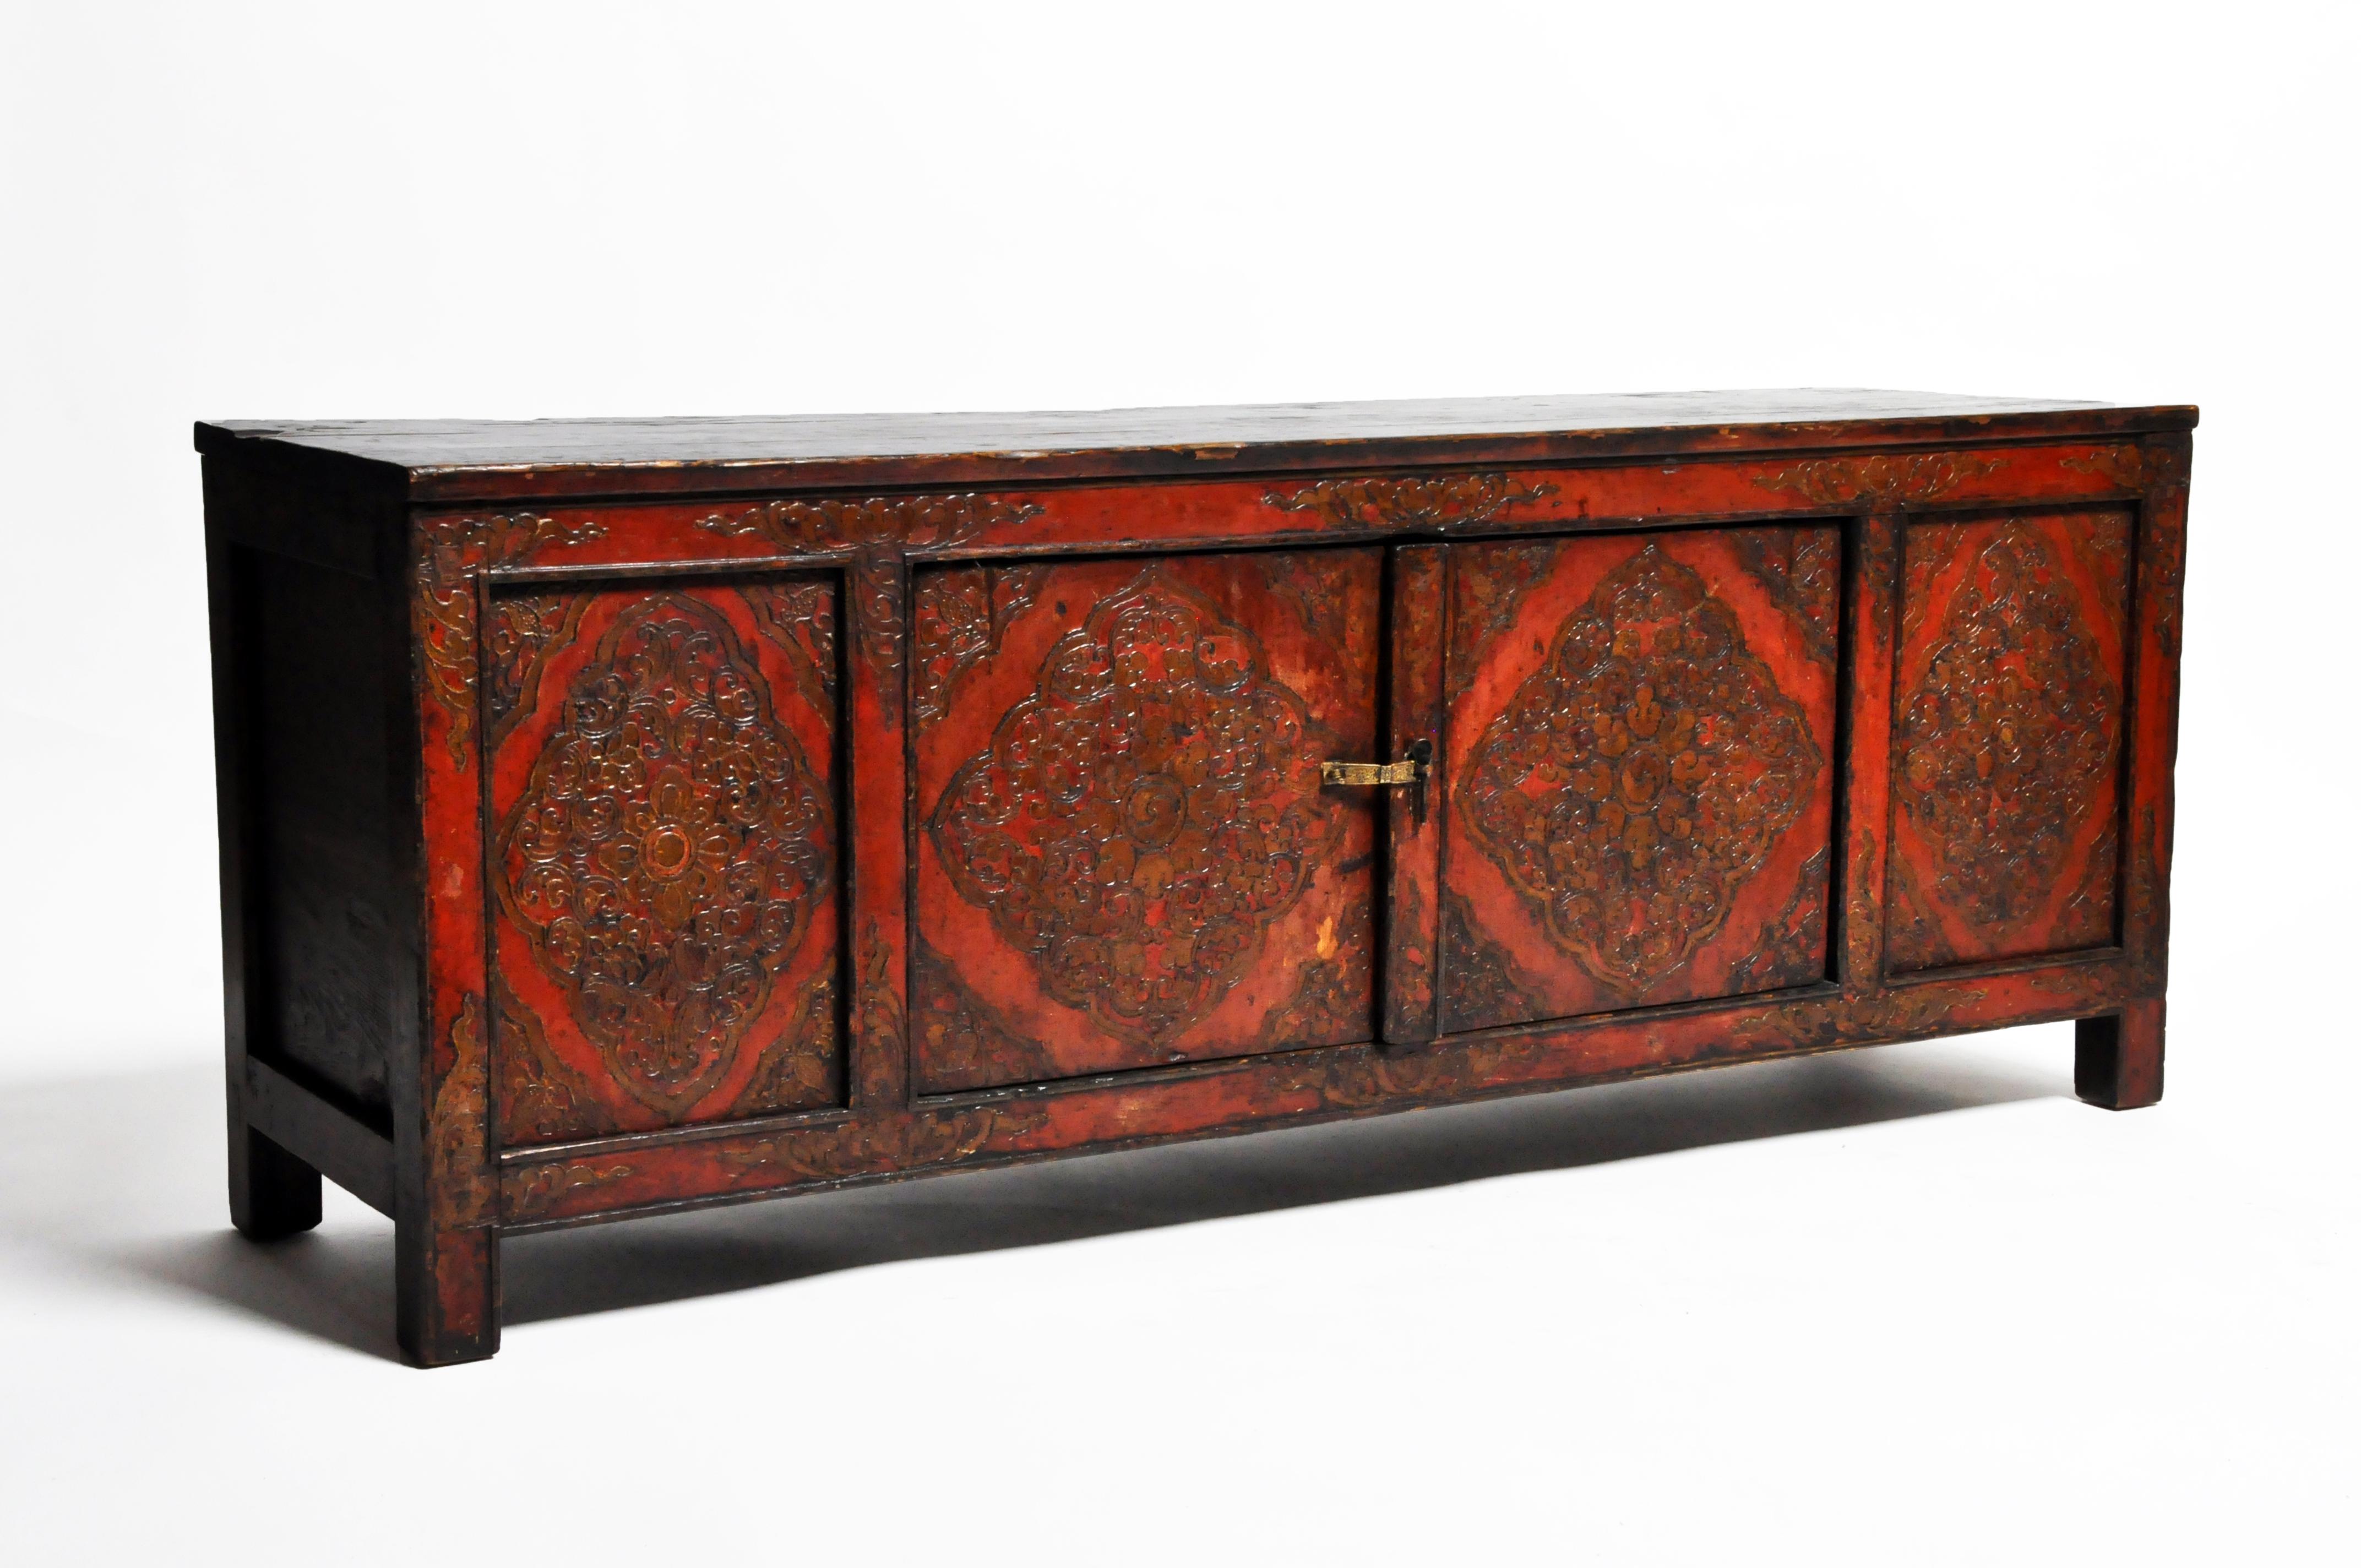 This low cabinet is from Tibet and made from wood and lacquer. The piece features a beautifully aged patina and a pair of doors for storage space.